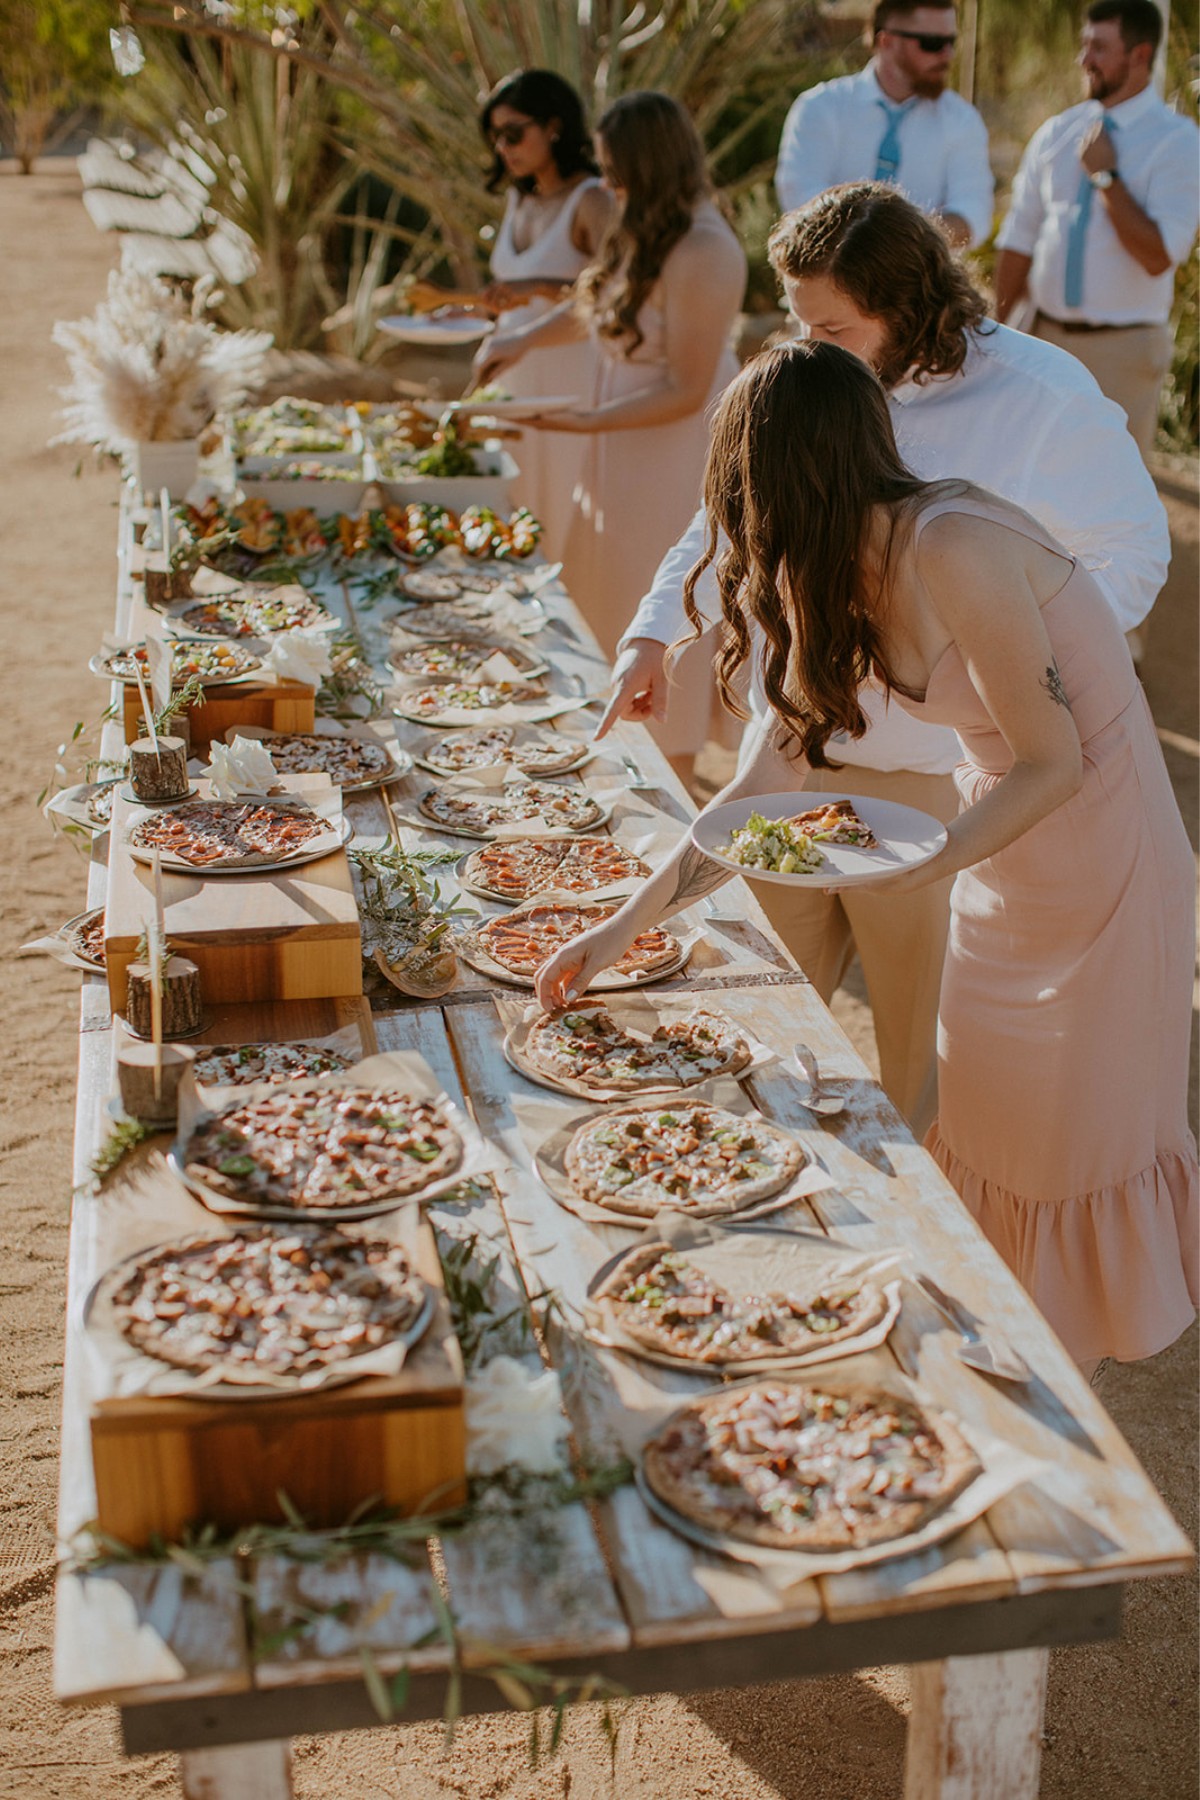 Wedding Catering Ideas Your Guests Will Love: Top 15